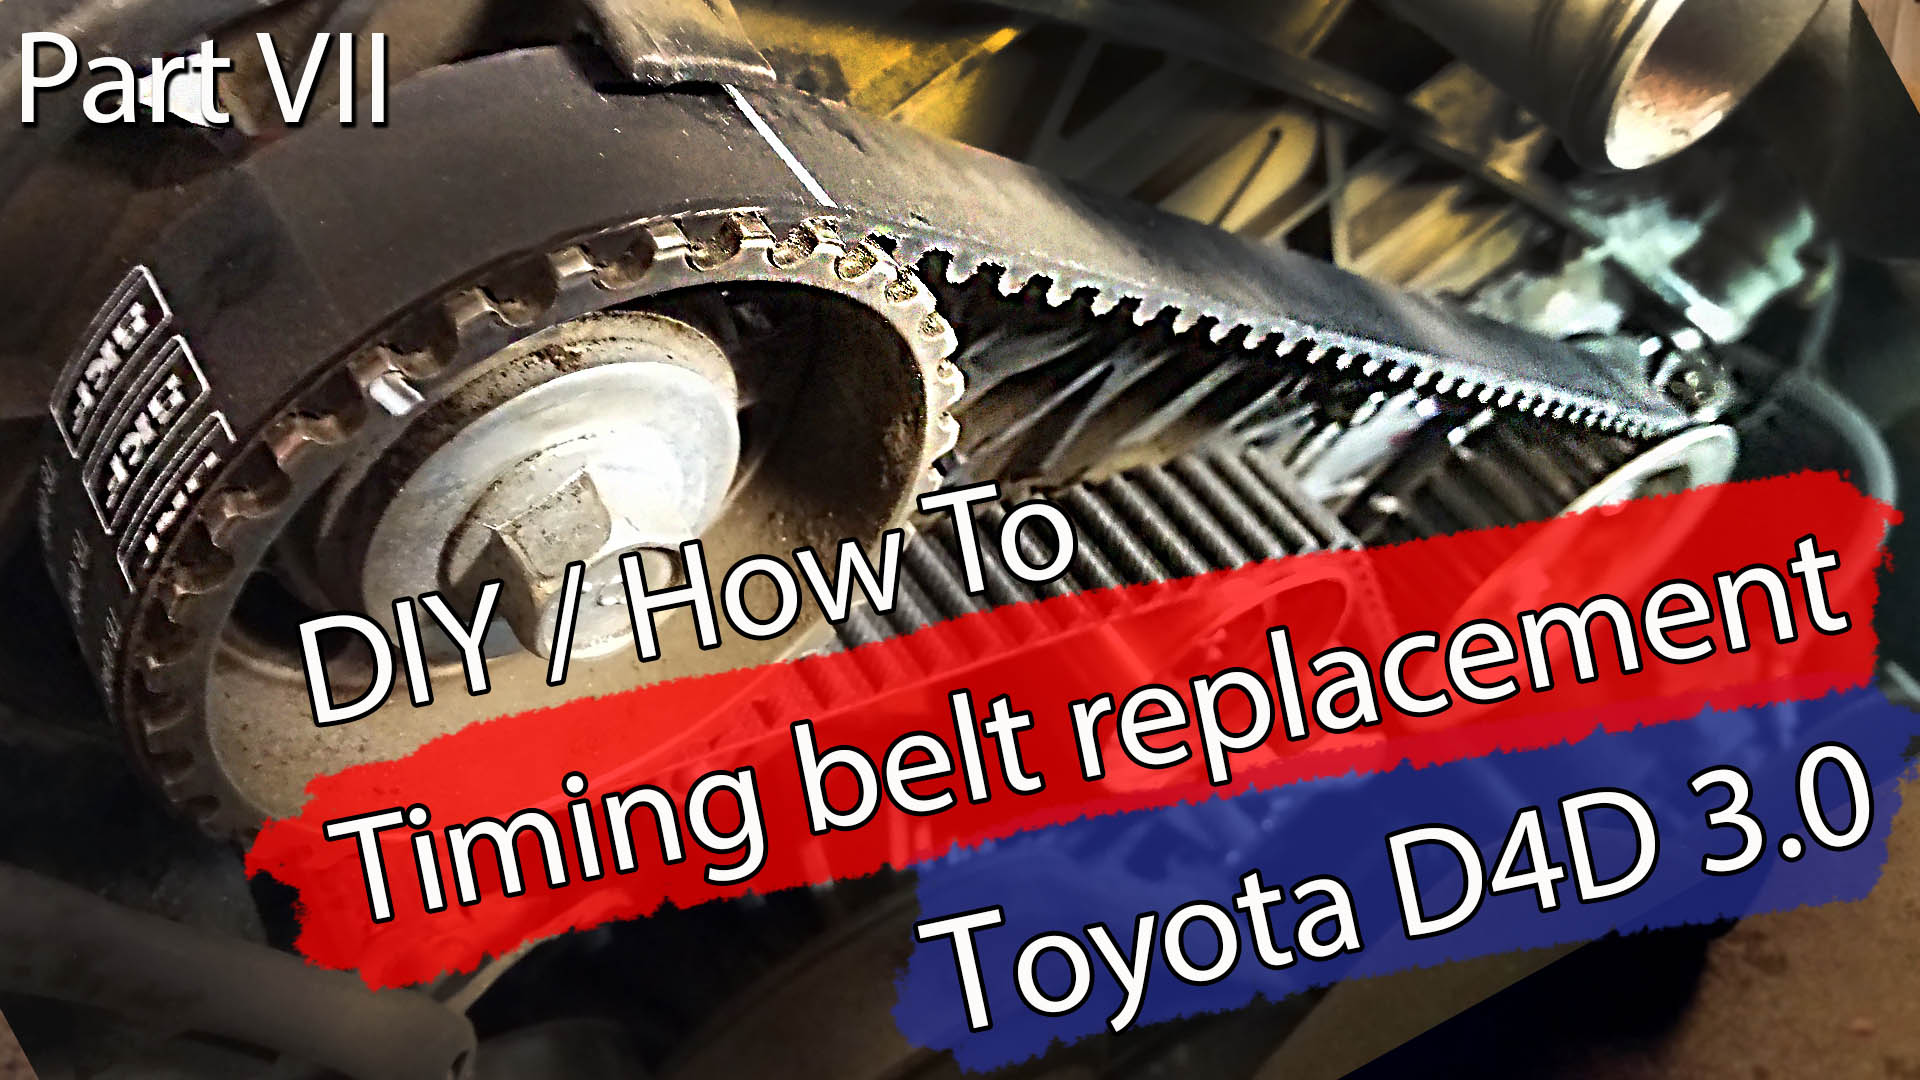 DIY / How To: Timing belt replacement